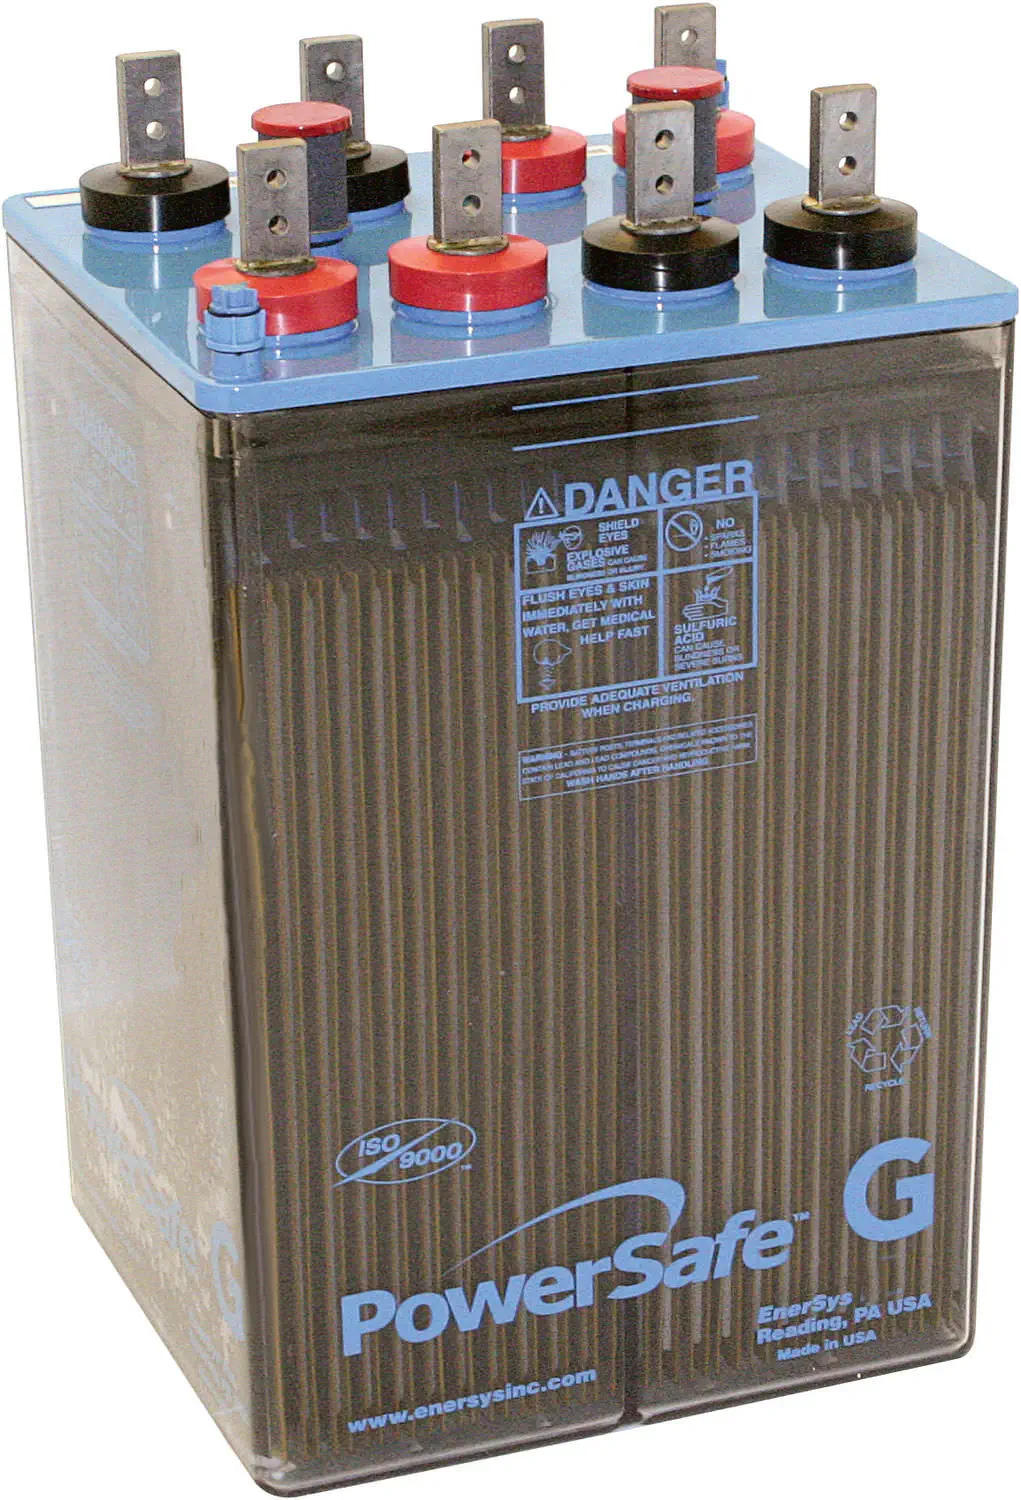 EnerSys PowerSafe 2GN-17